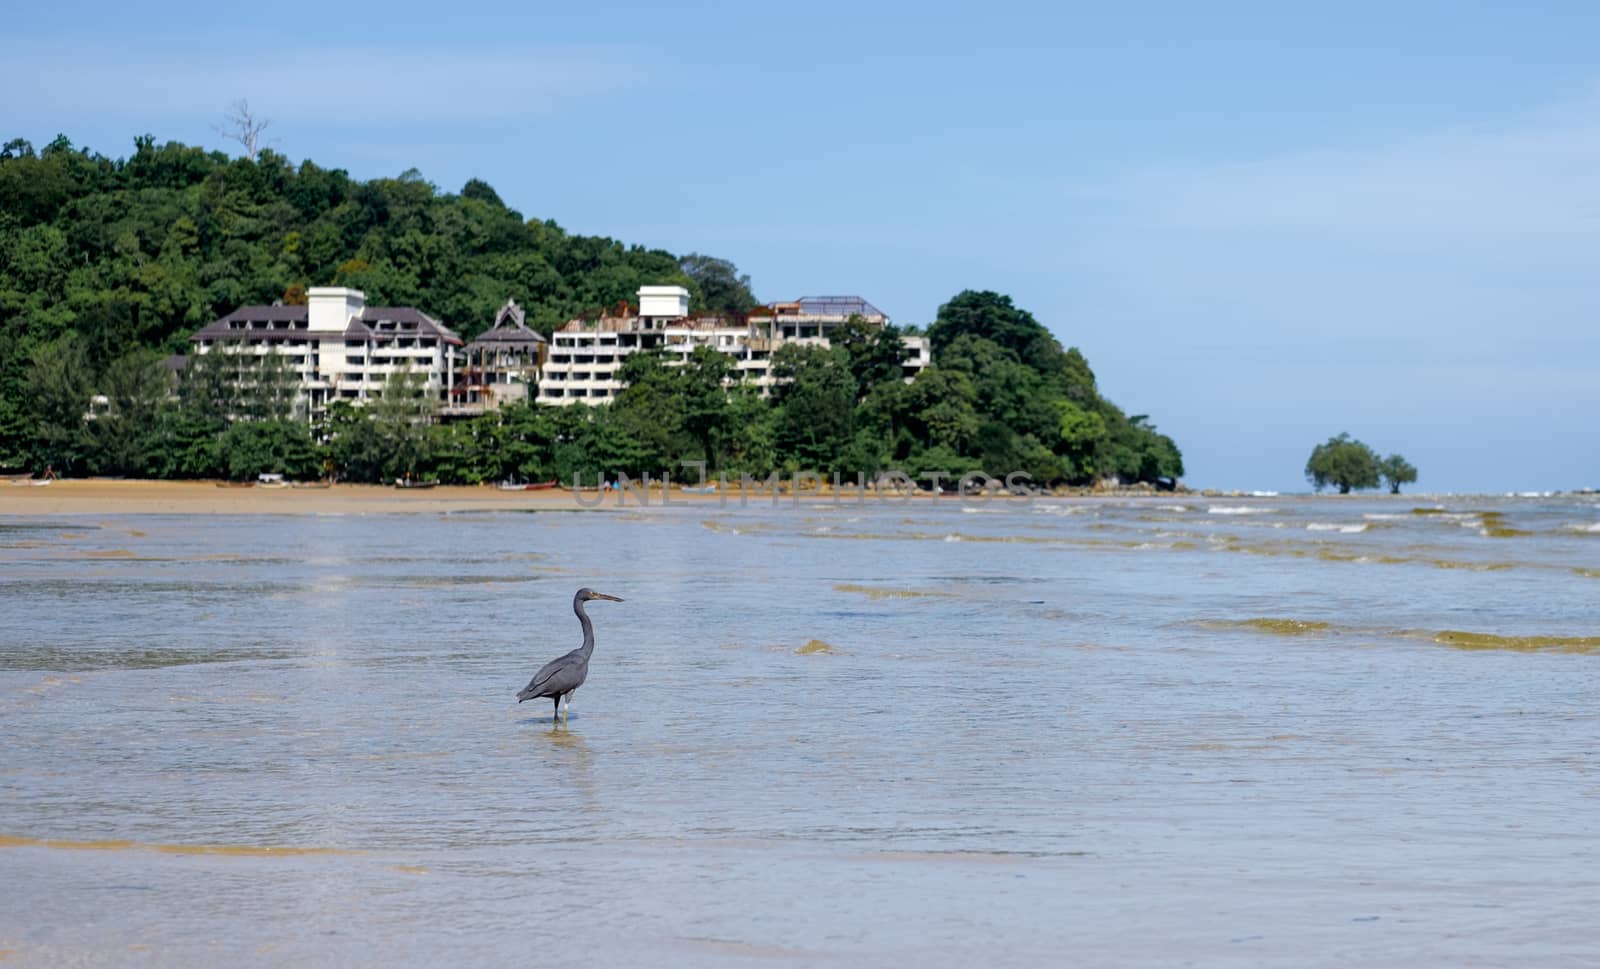 Black heron in the sea waves. Abandoned hotel in the background. Thailand. Phuket